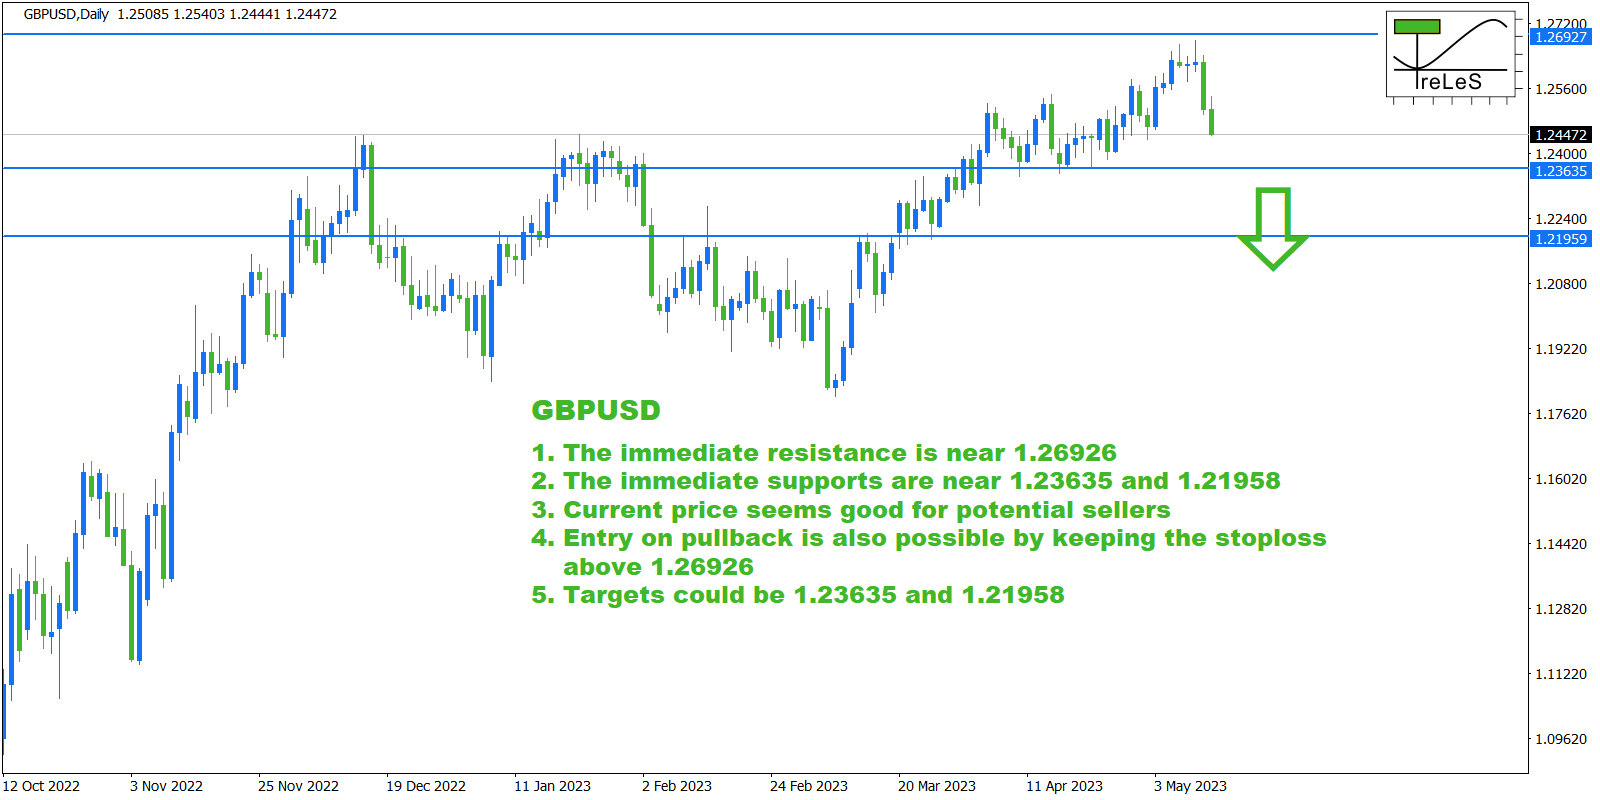 Forex forecast 2023-05-14 in GBPUSD